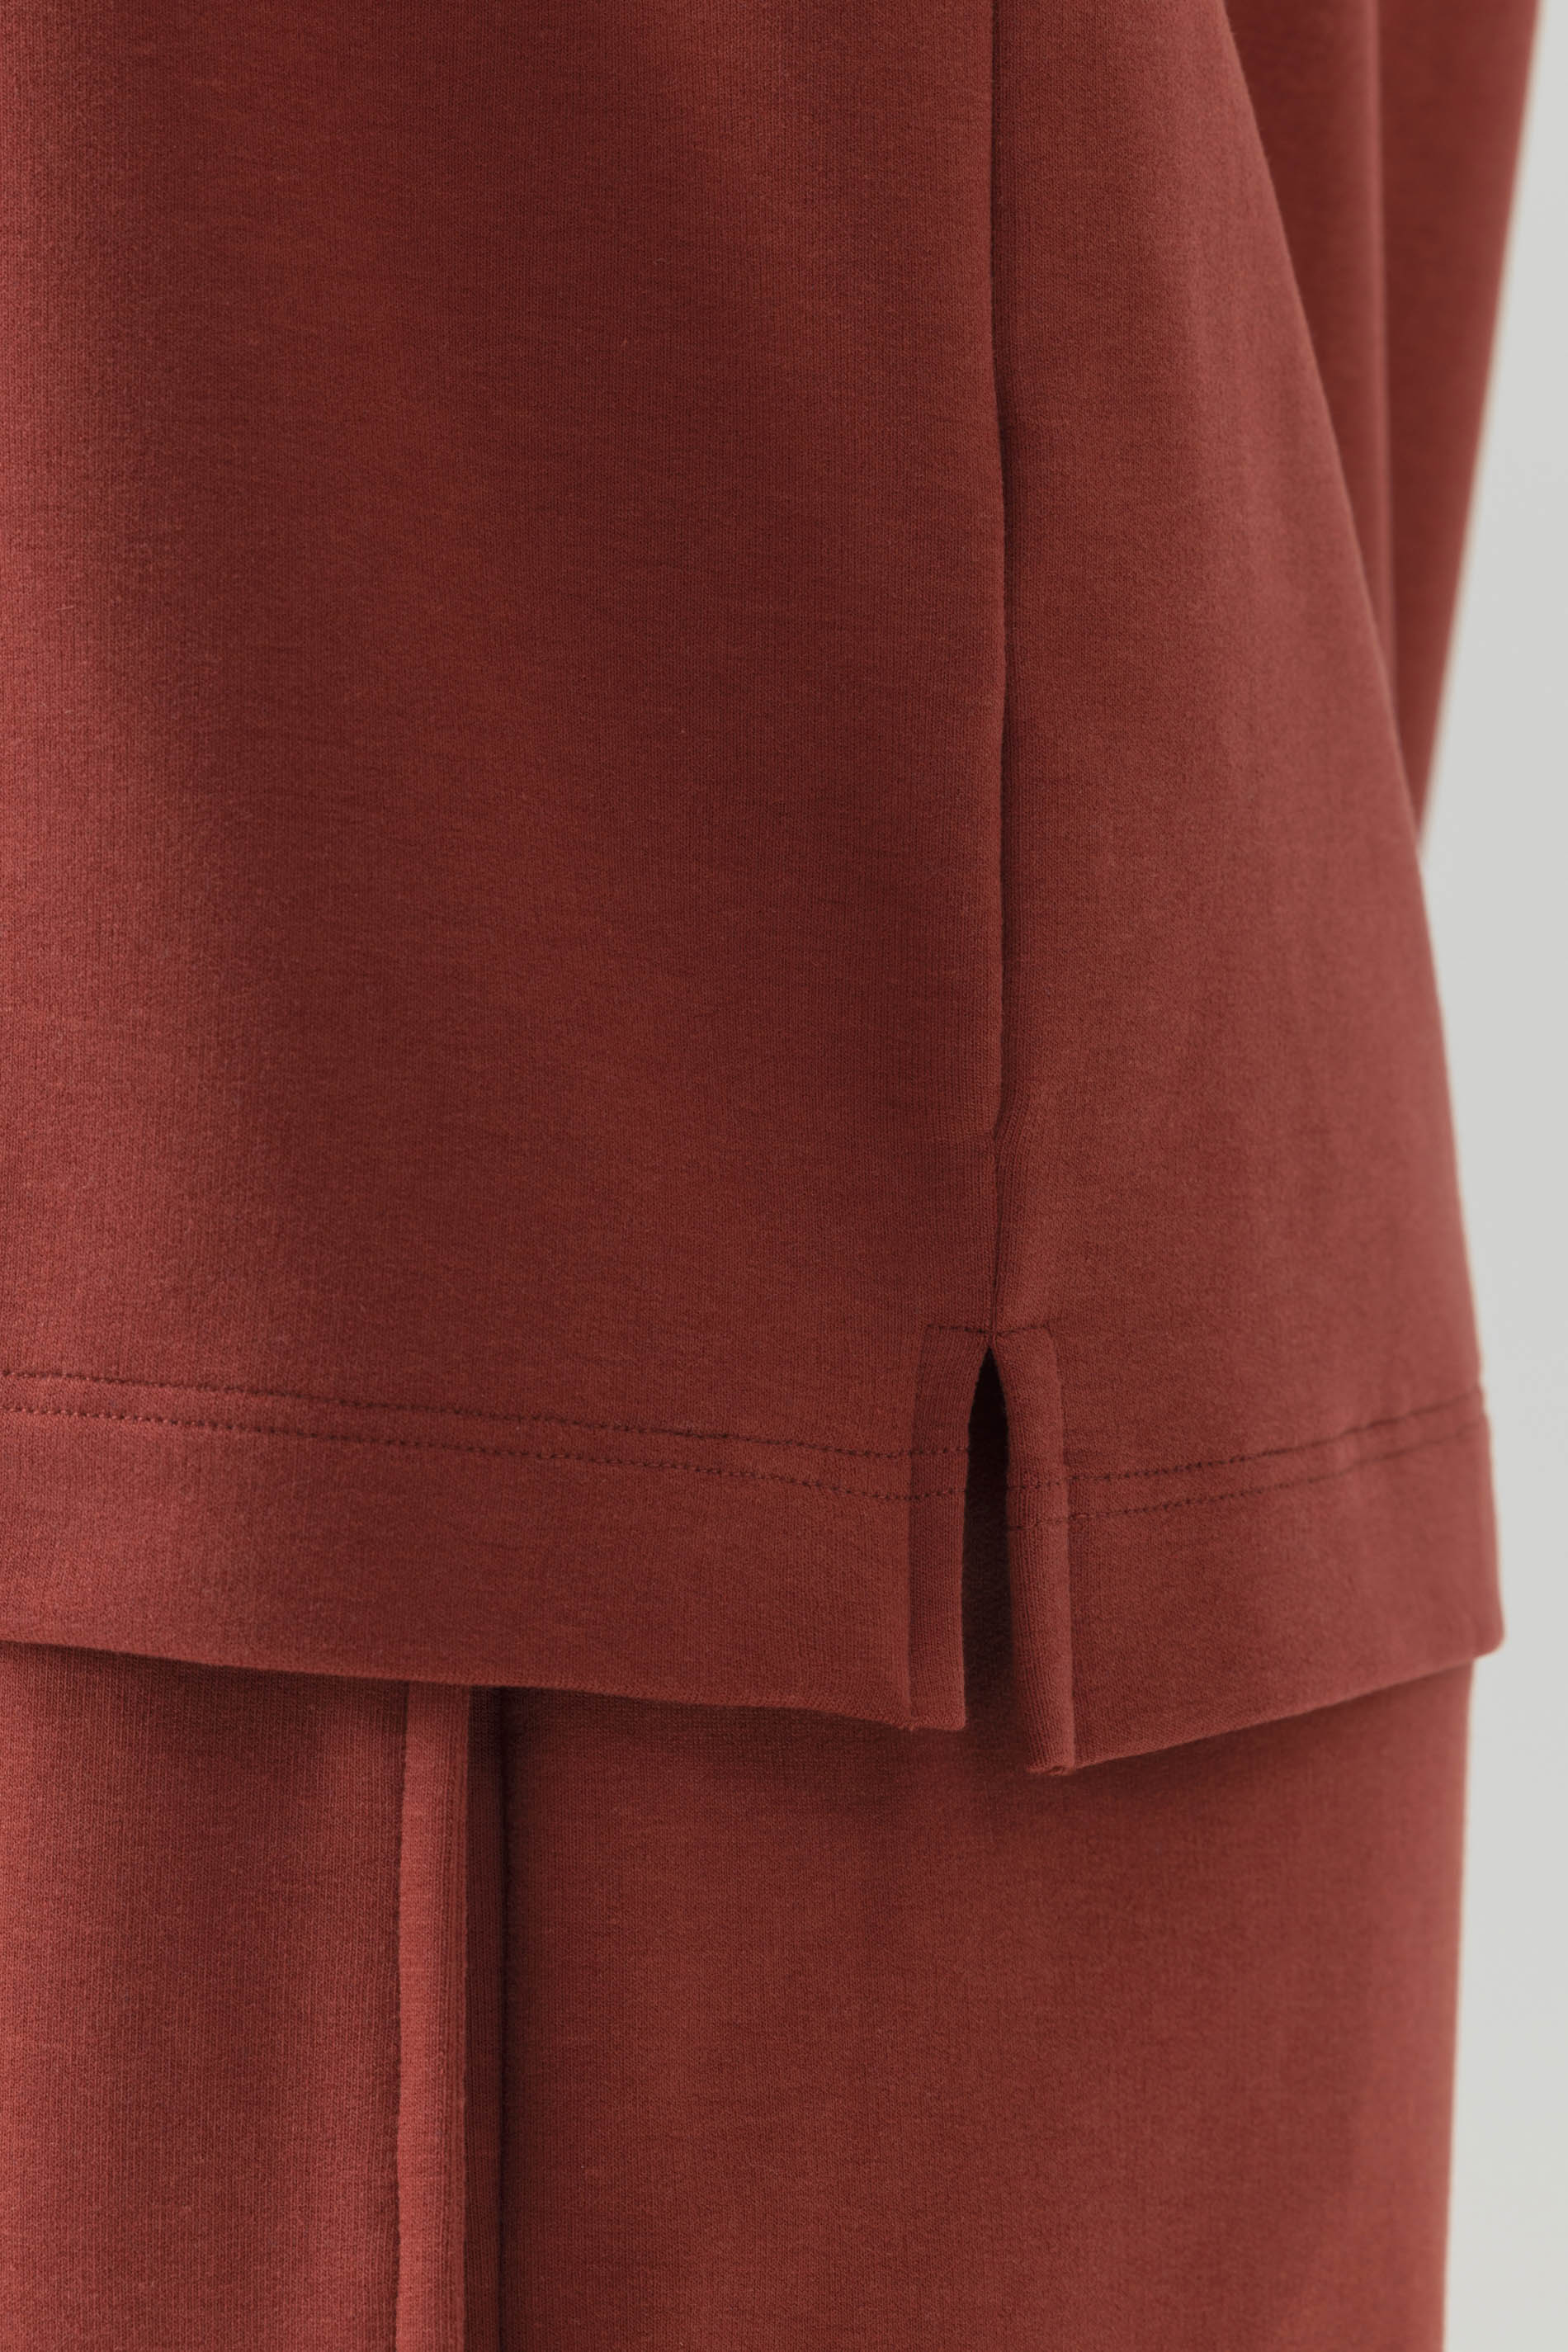 Long sleeves Serie Enjoy Colour Detail View 02 | mey®